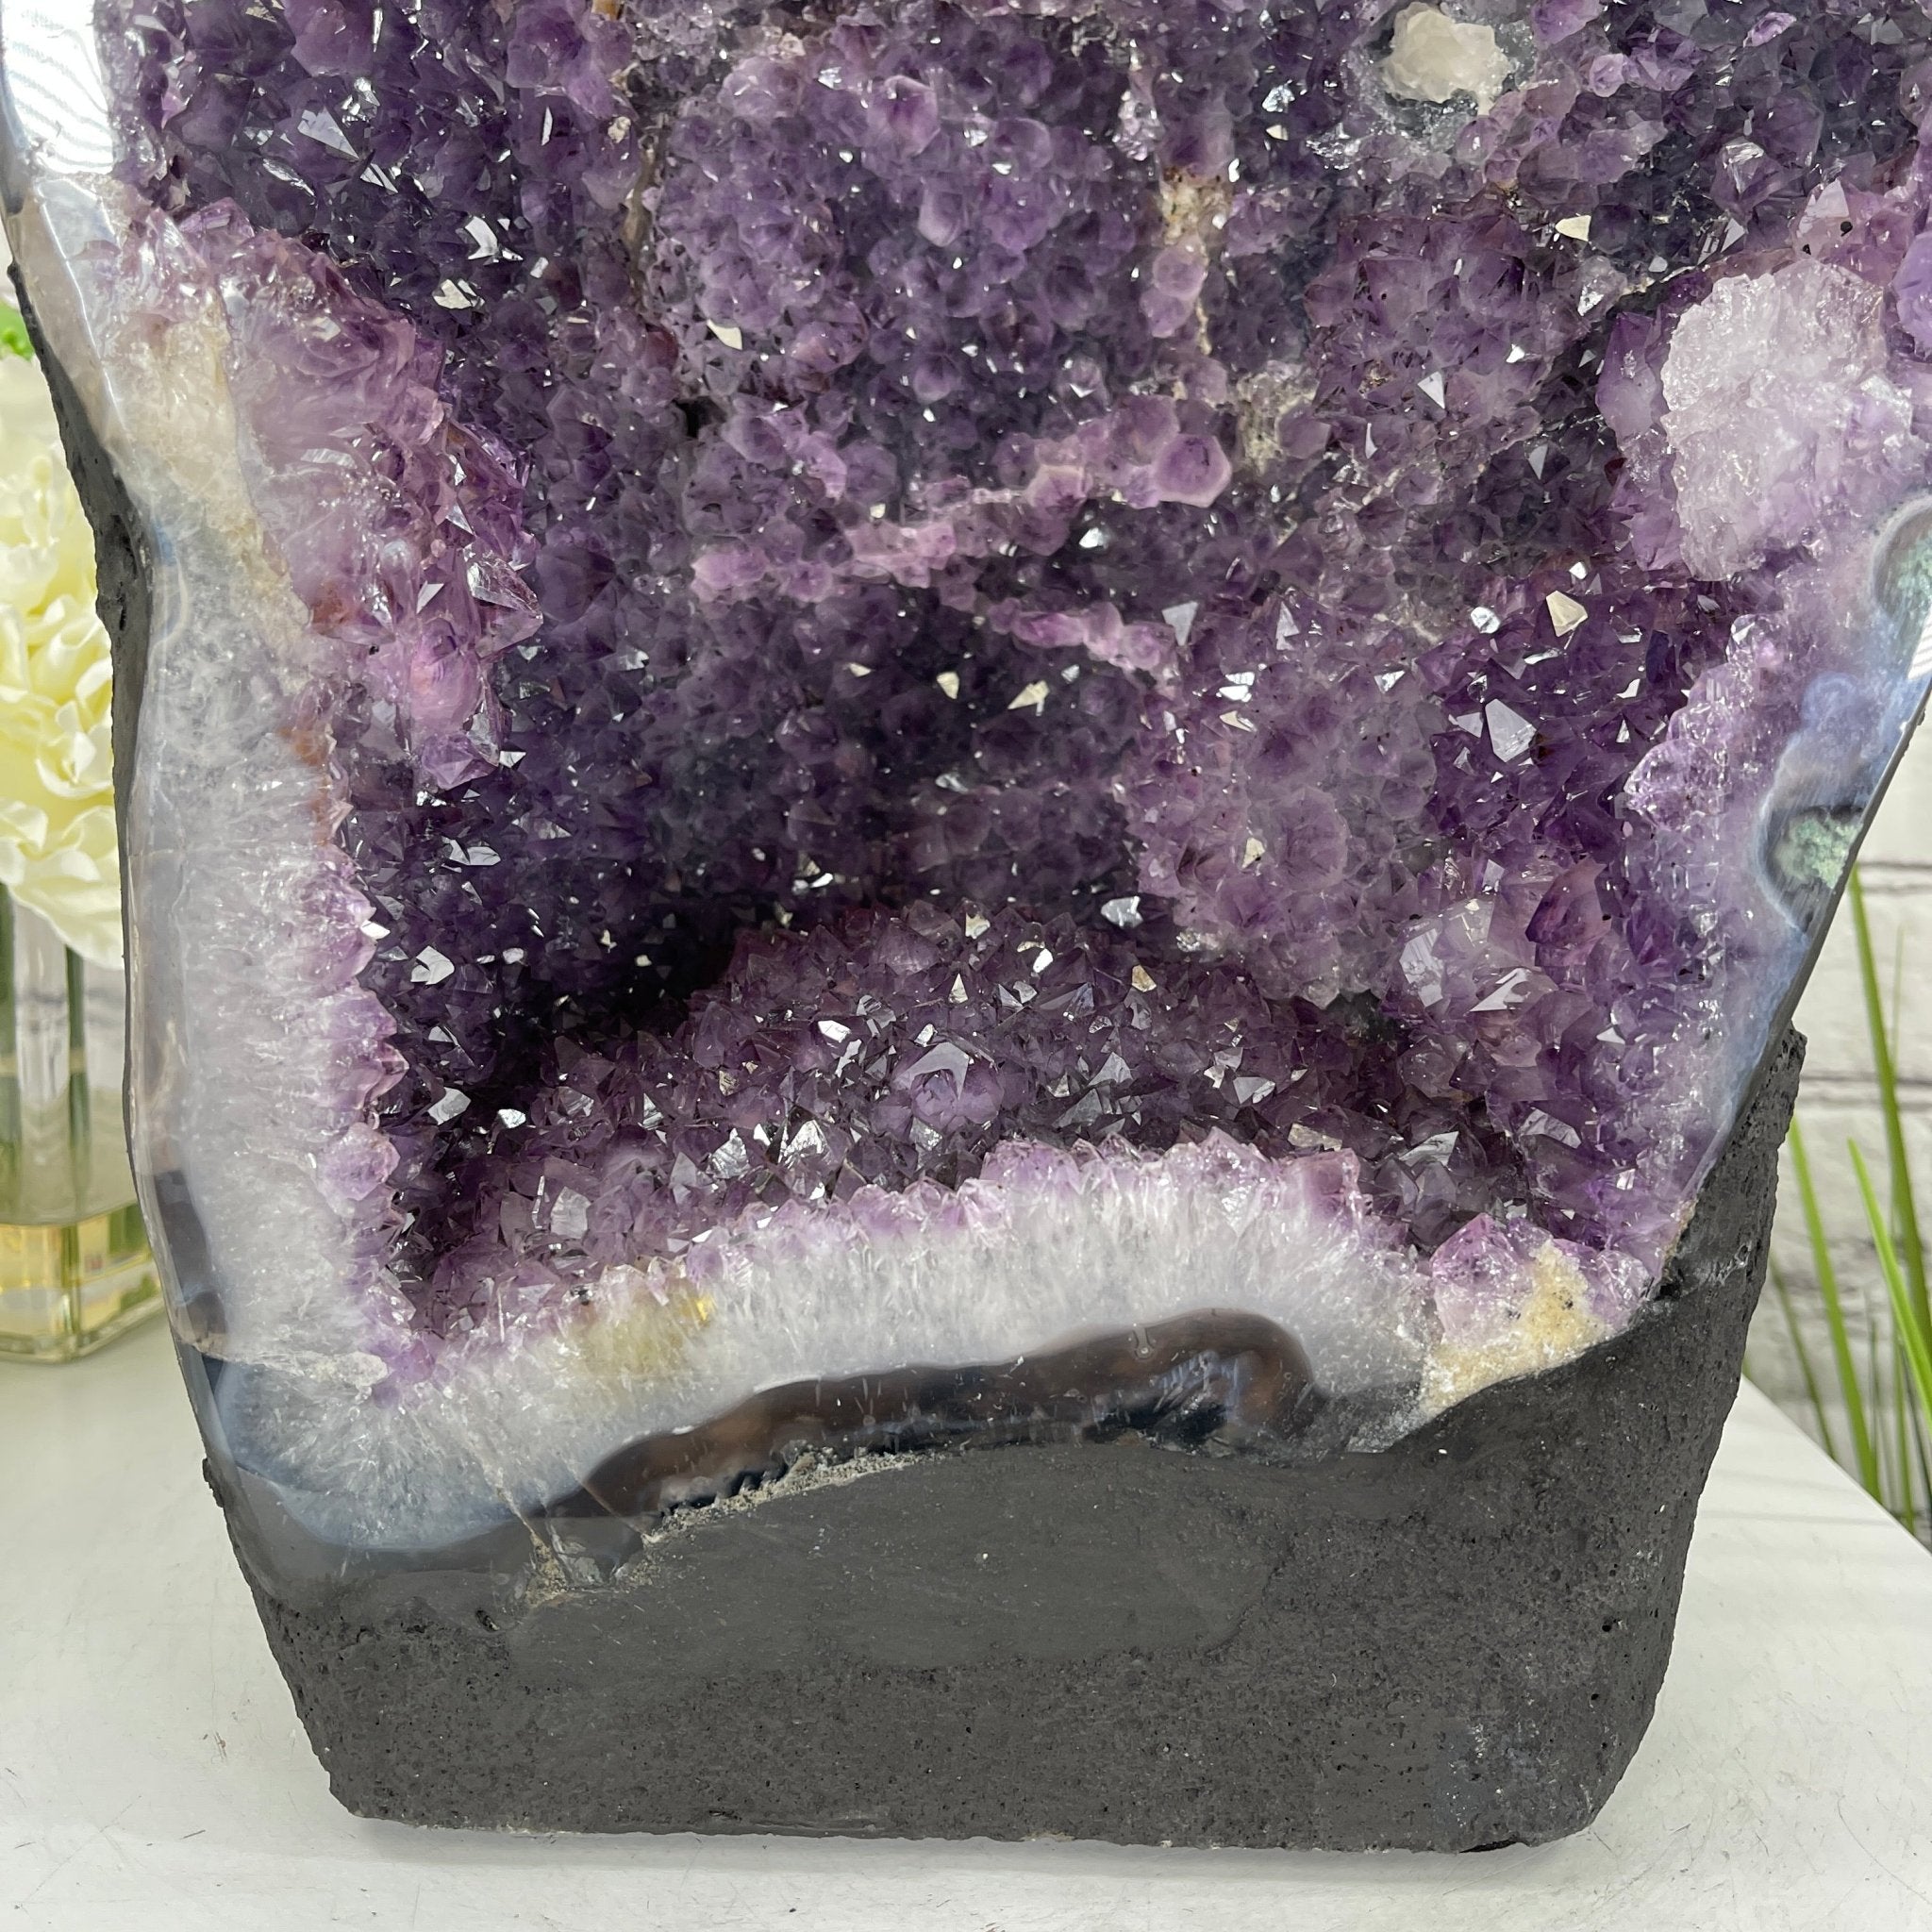 Extra Quality Brazilian Amethyst Cathedral, 19.25” tall & 38.9 lbs #5601-0435 by Brazil Gems - Brazil GemsBrazil GemsExtra Quality Brazilian Amethyst Cathedral, 19.25” tall & 38.9 lbs #5601-0435 by Brazil GemsCathedrals5601-0435